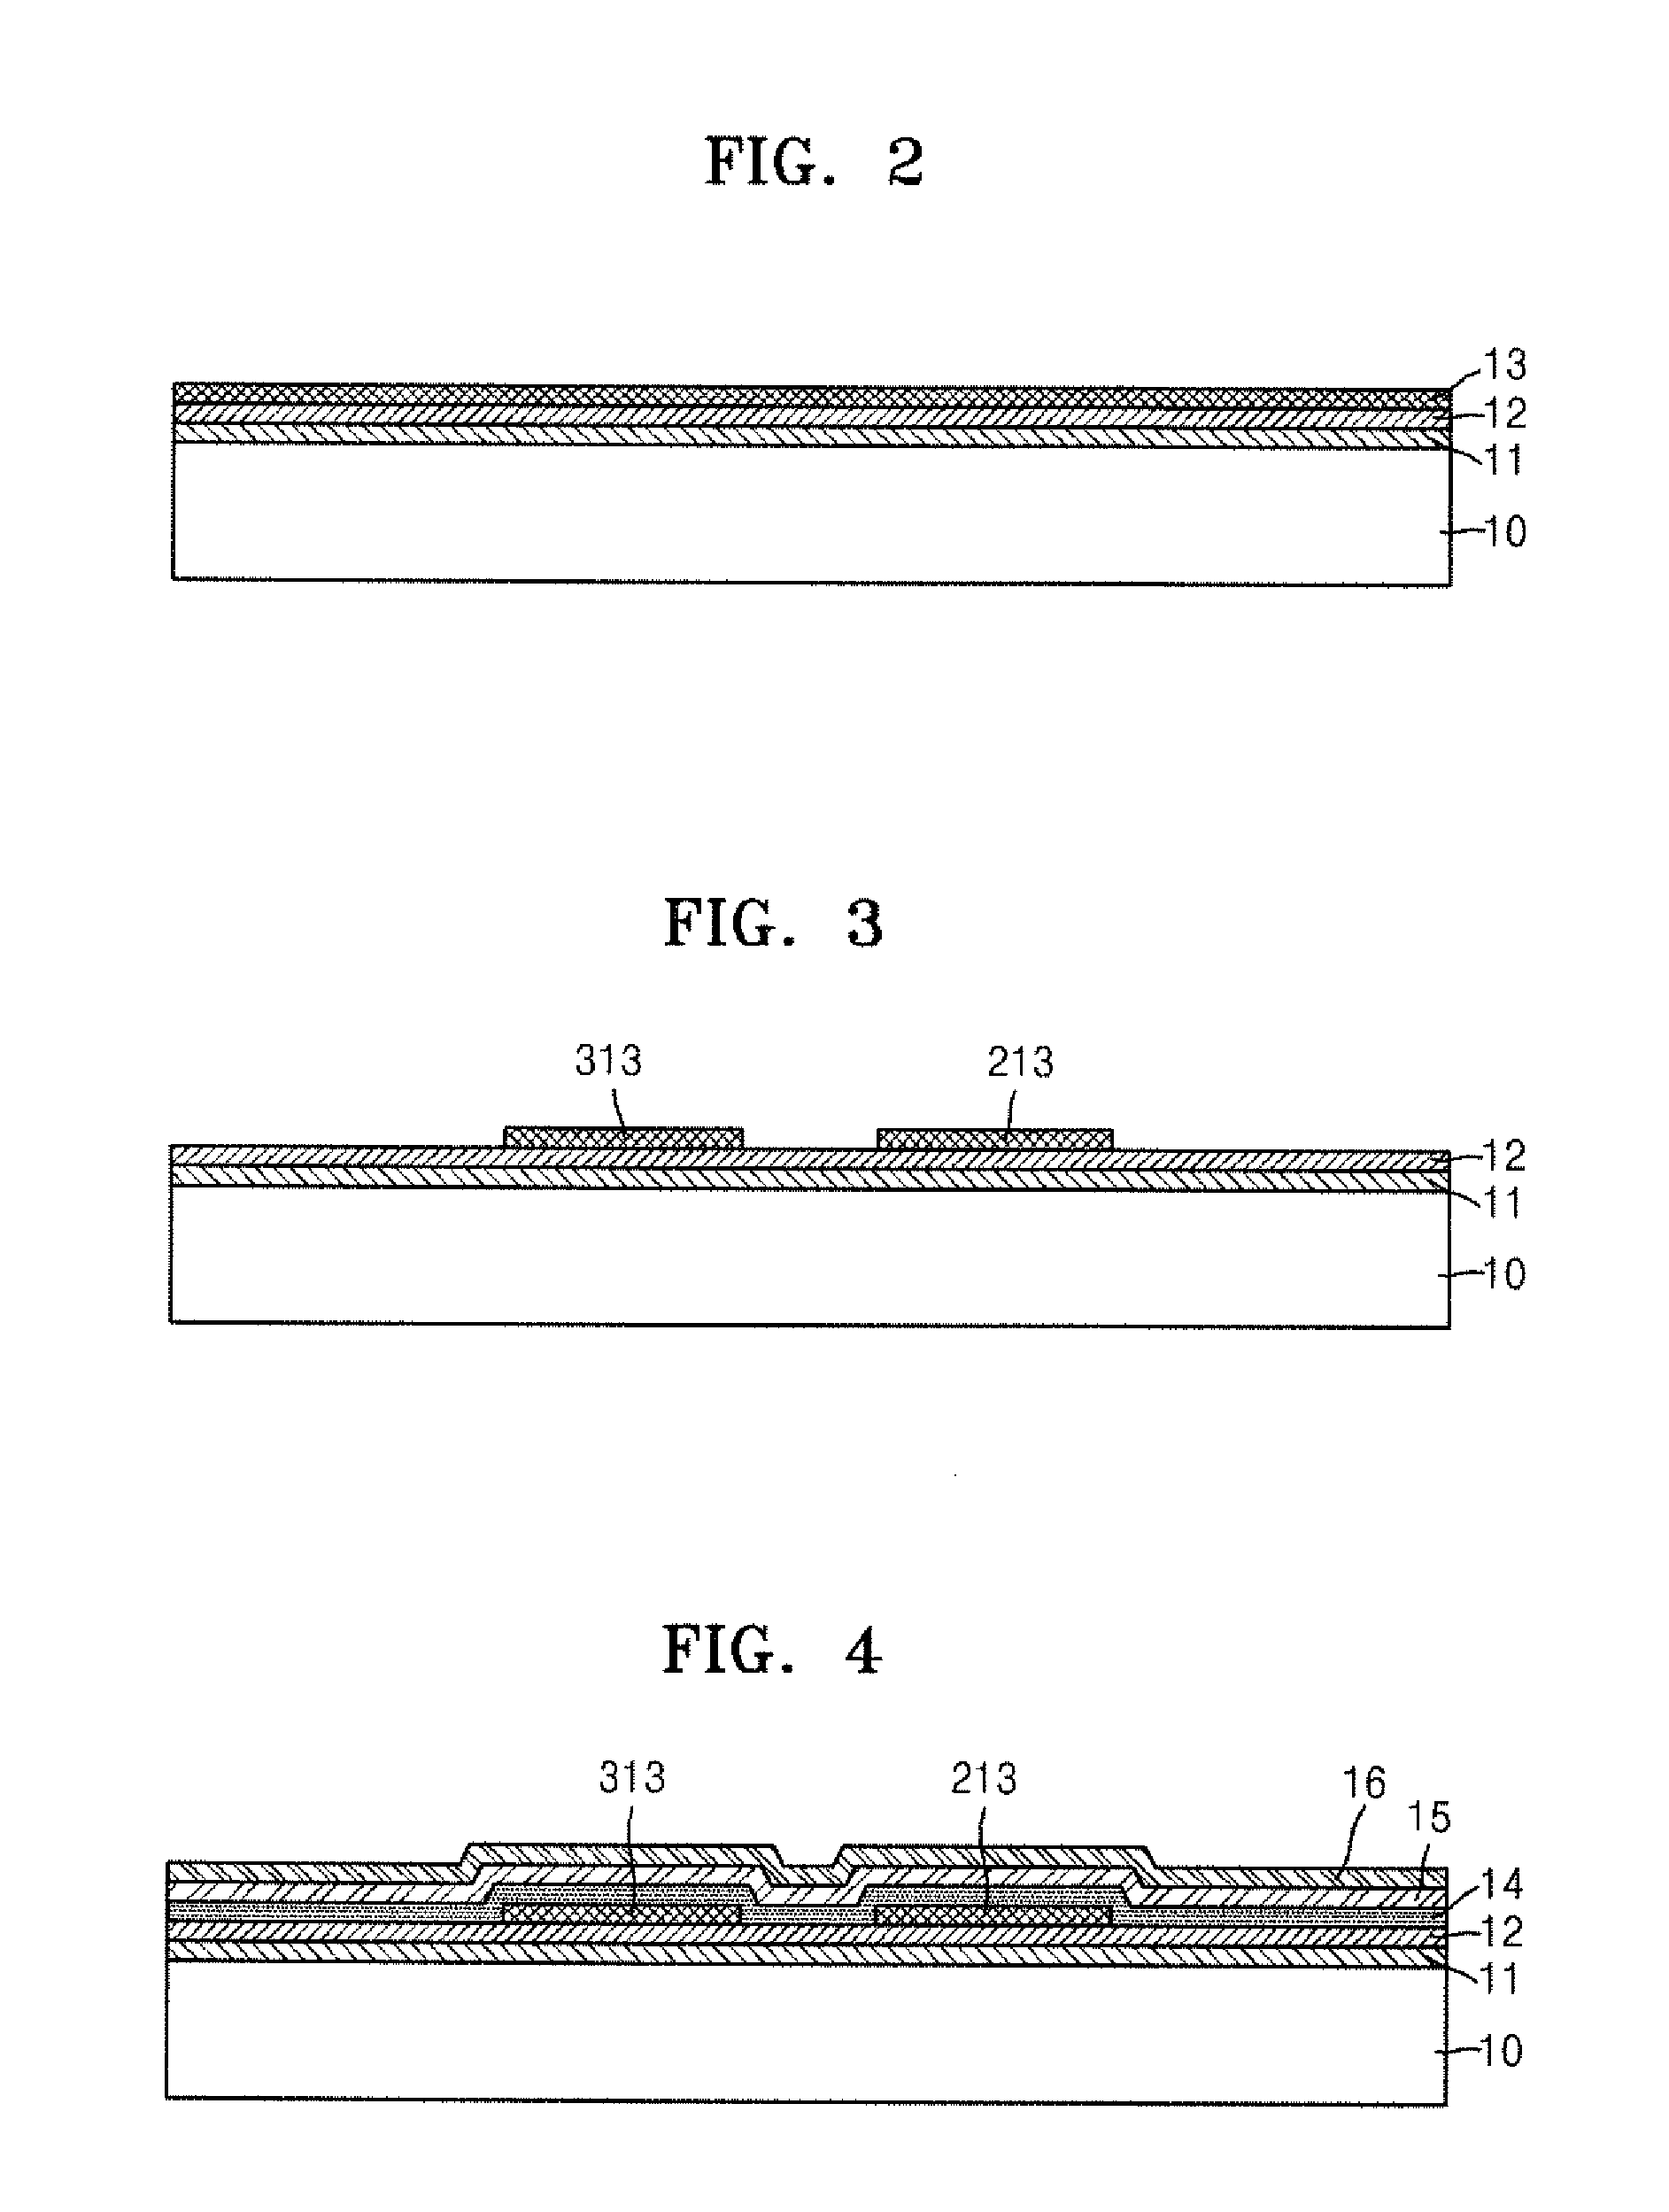 Organic Light-Emitting Display Device and Method of Manufacturing the Same